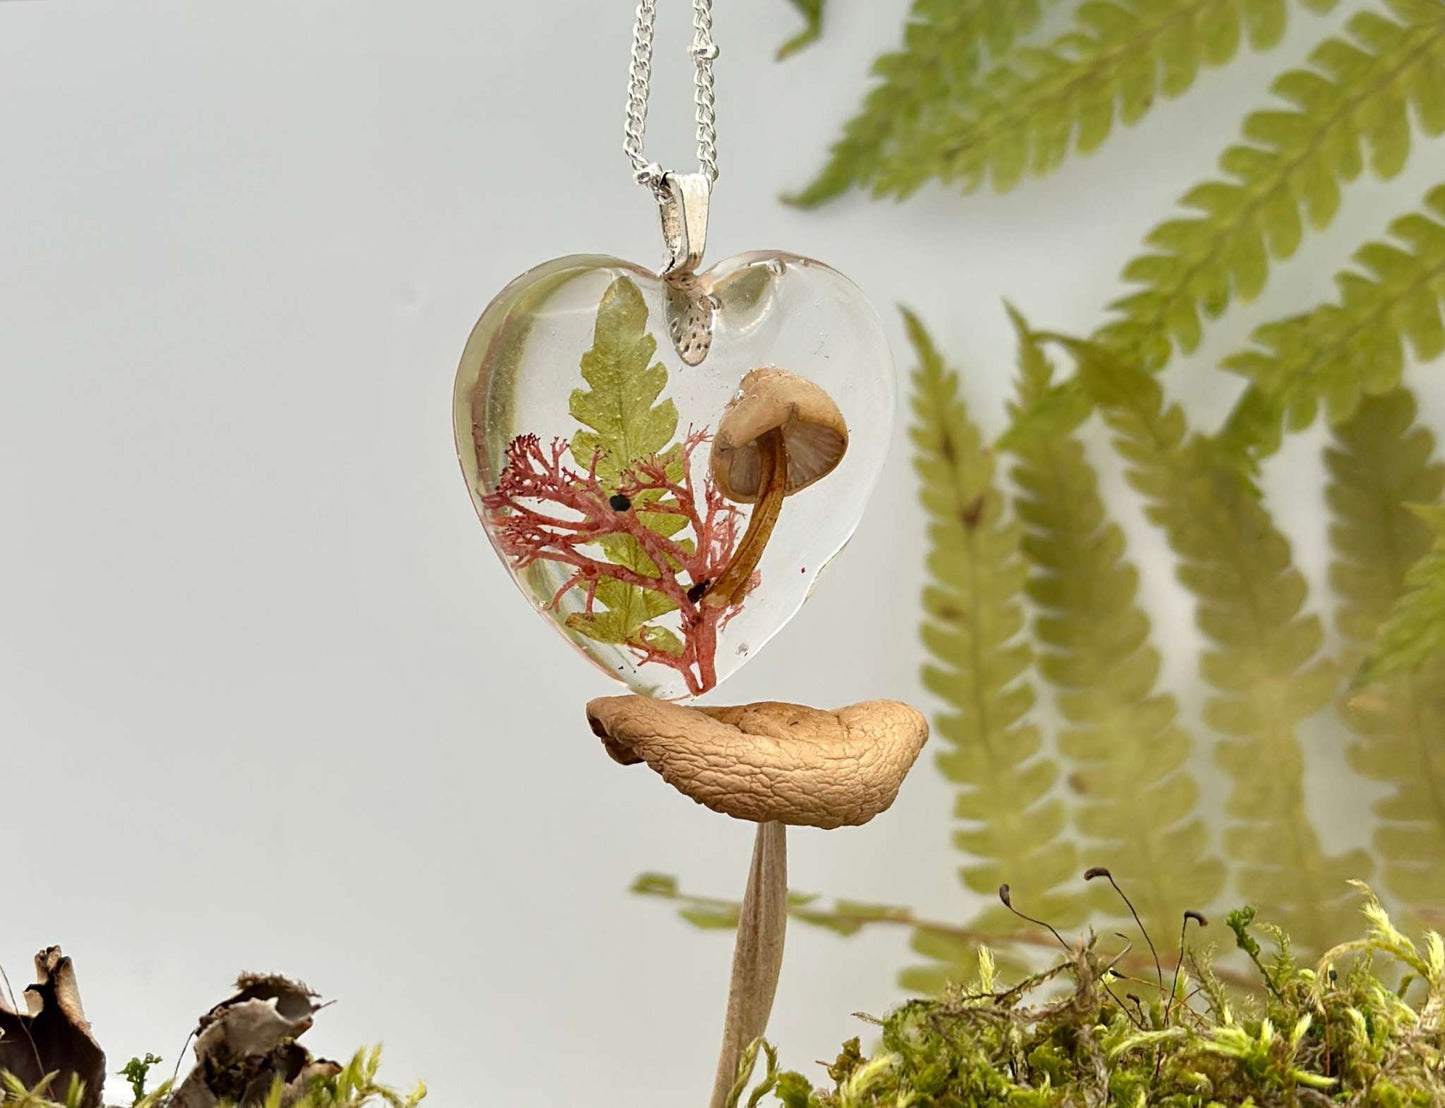 Shrooms & Ferns Pendant Inspired by Mother Nature- Handmade with Resin